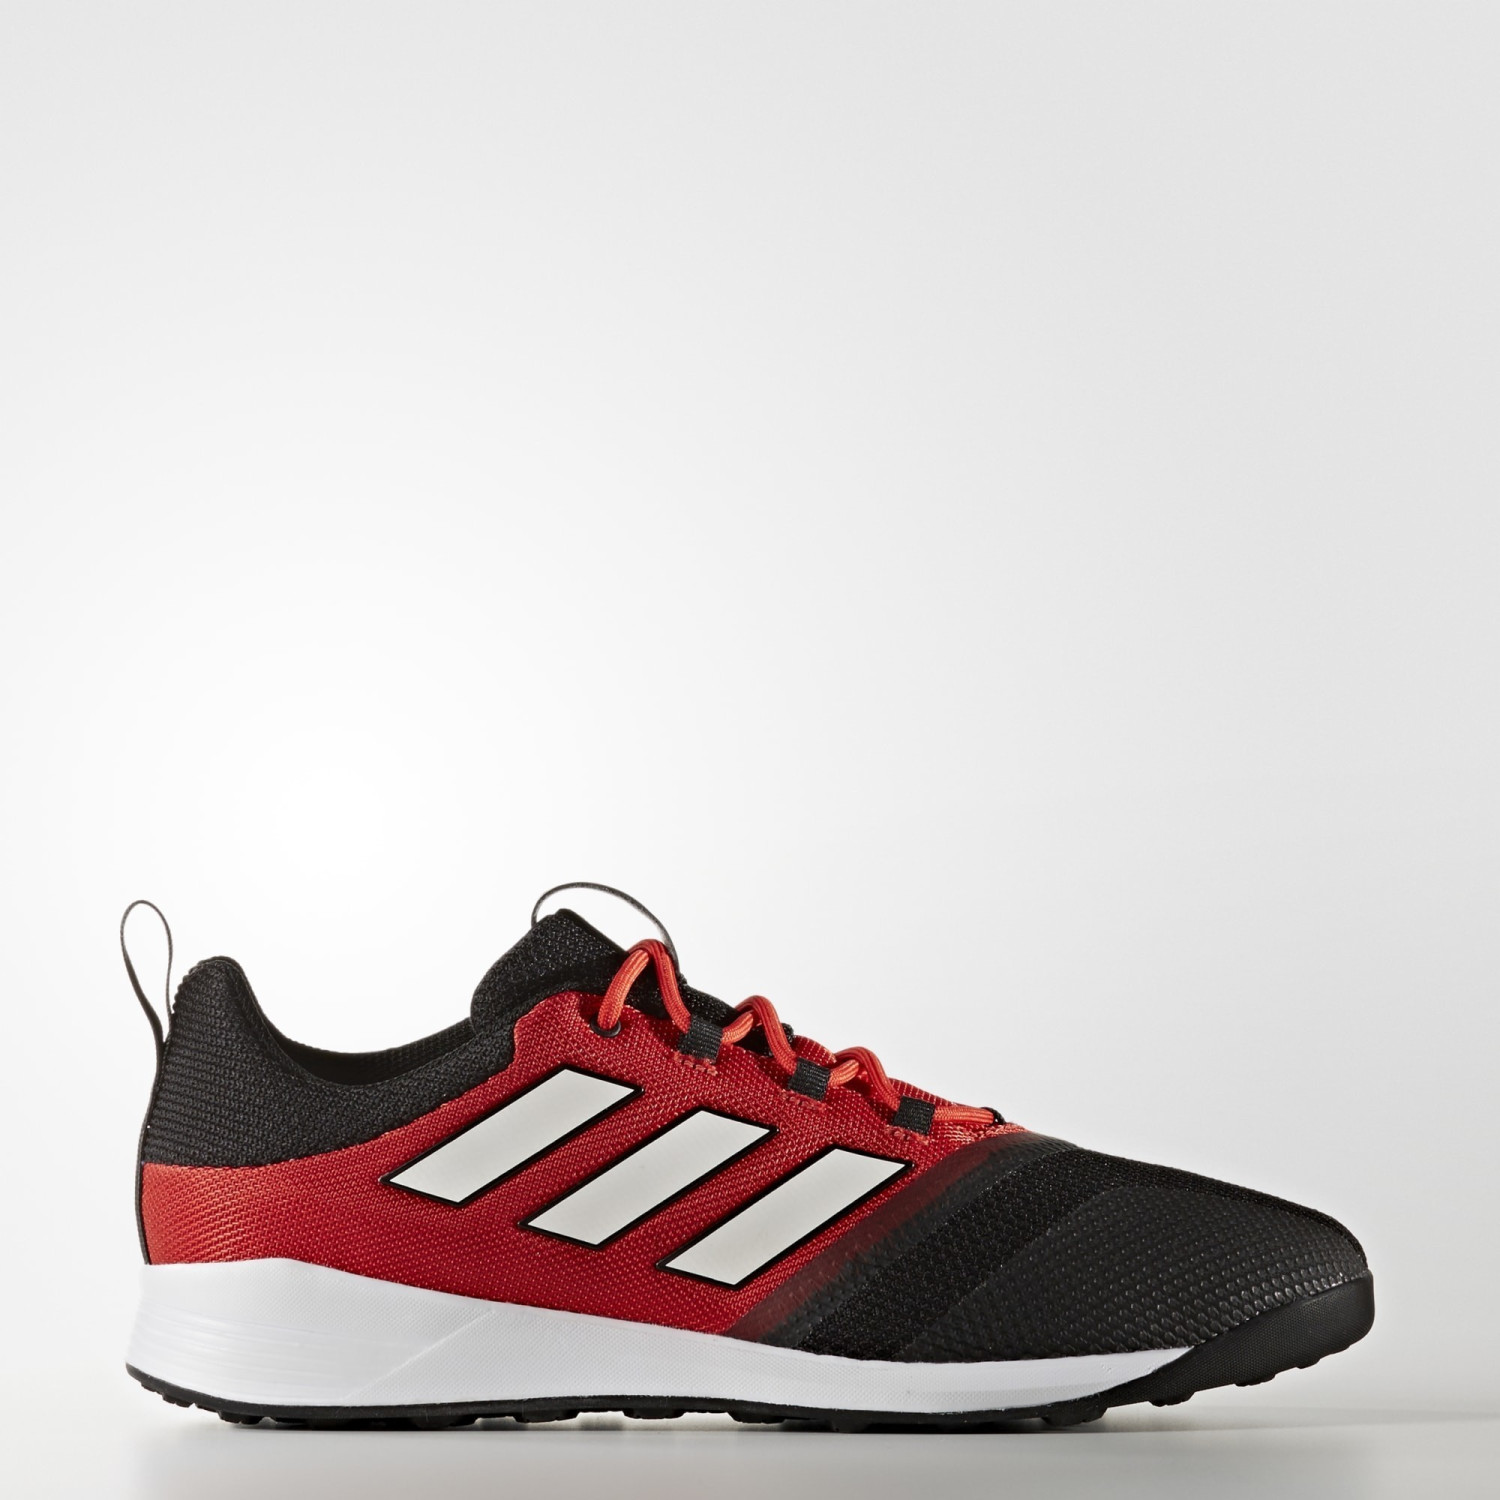 Adidas Ace Tango 17.2 TR red/footwear white/core black